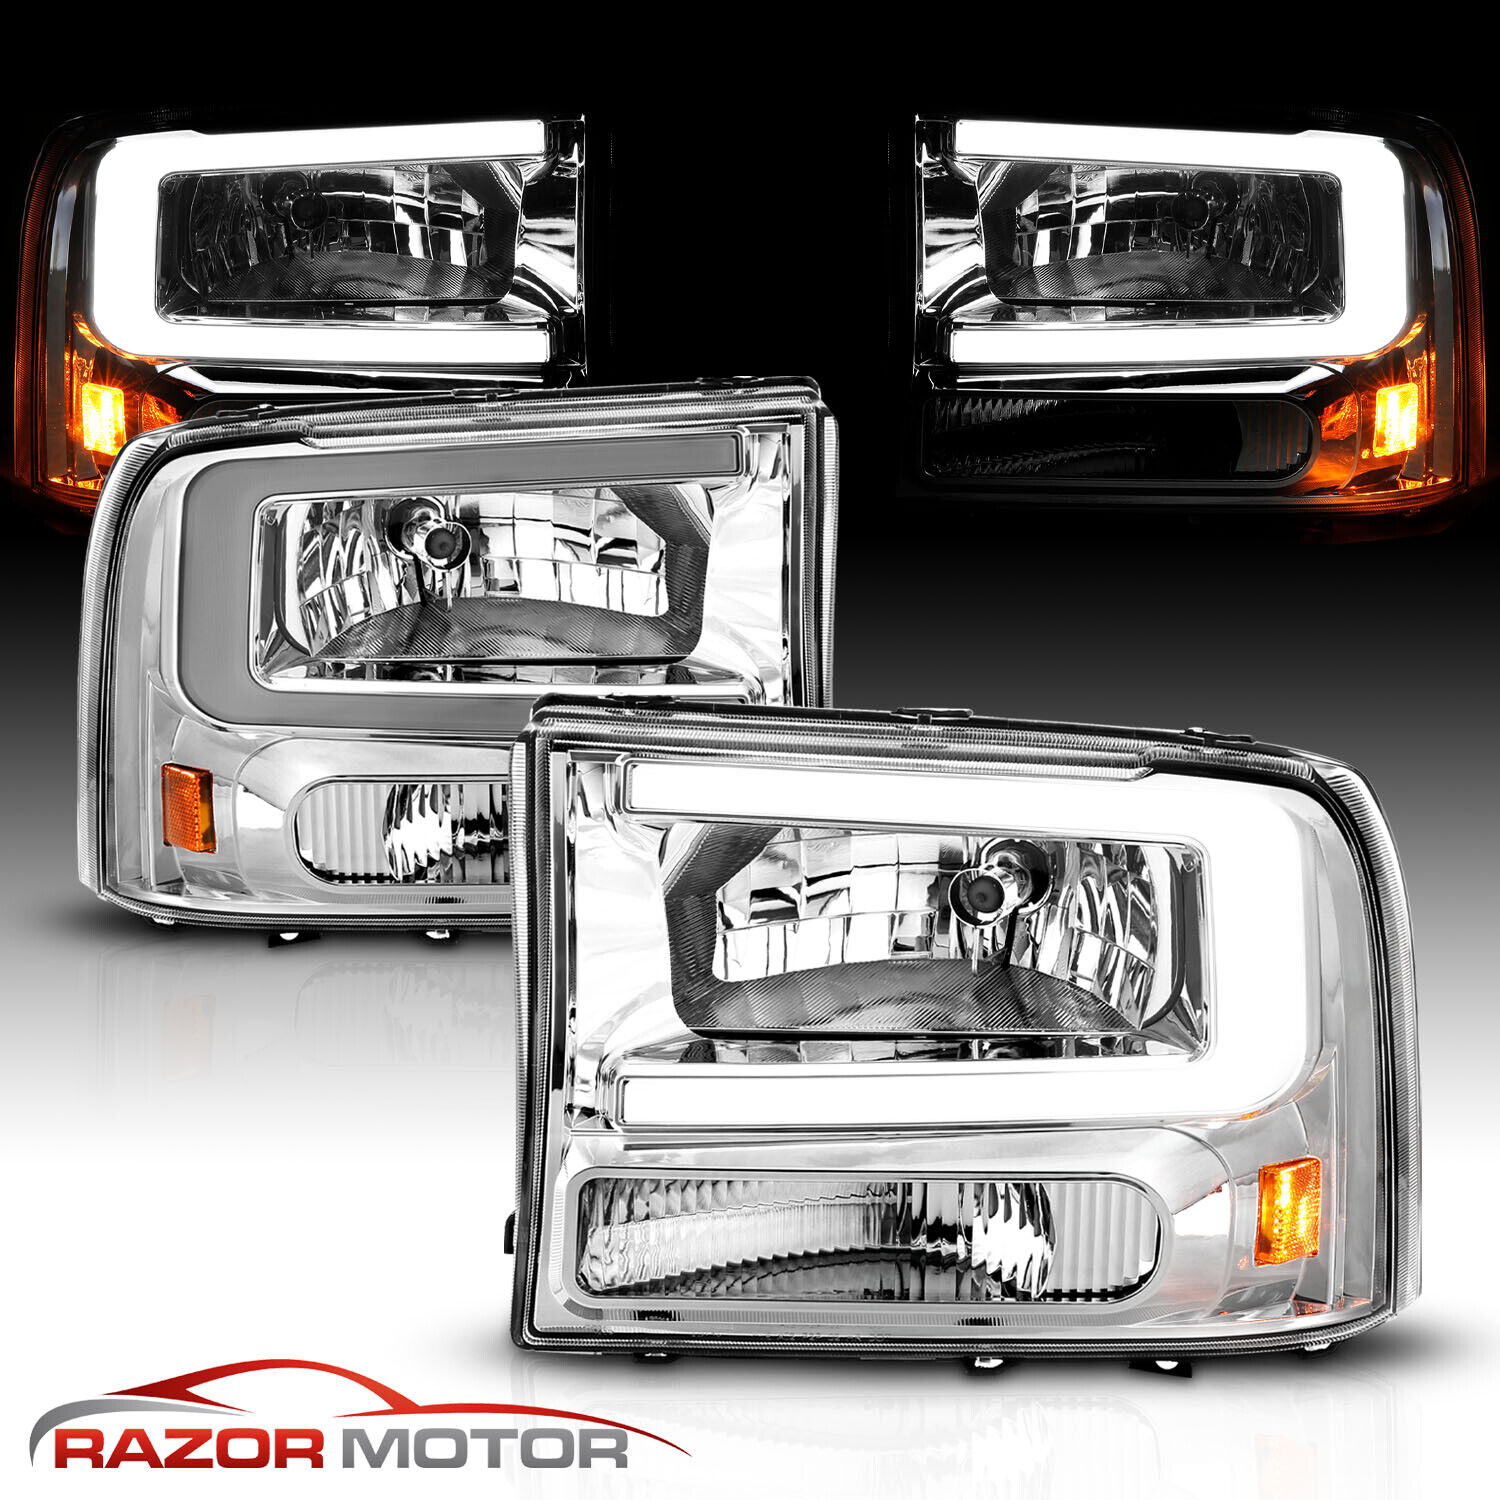 1999-2004 [LED C Bar] For Ford F250/F350 Superduty Excursion Chrome Headlights